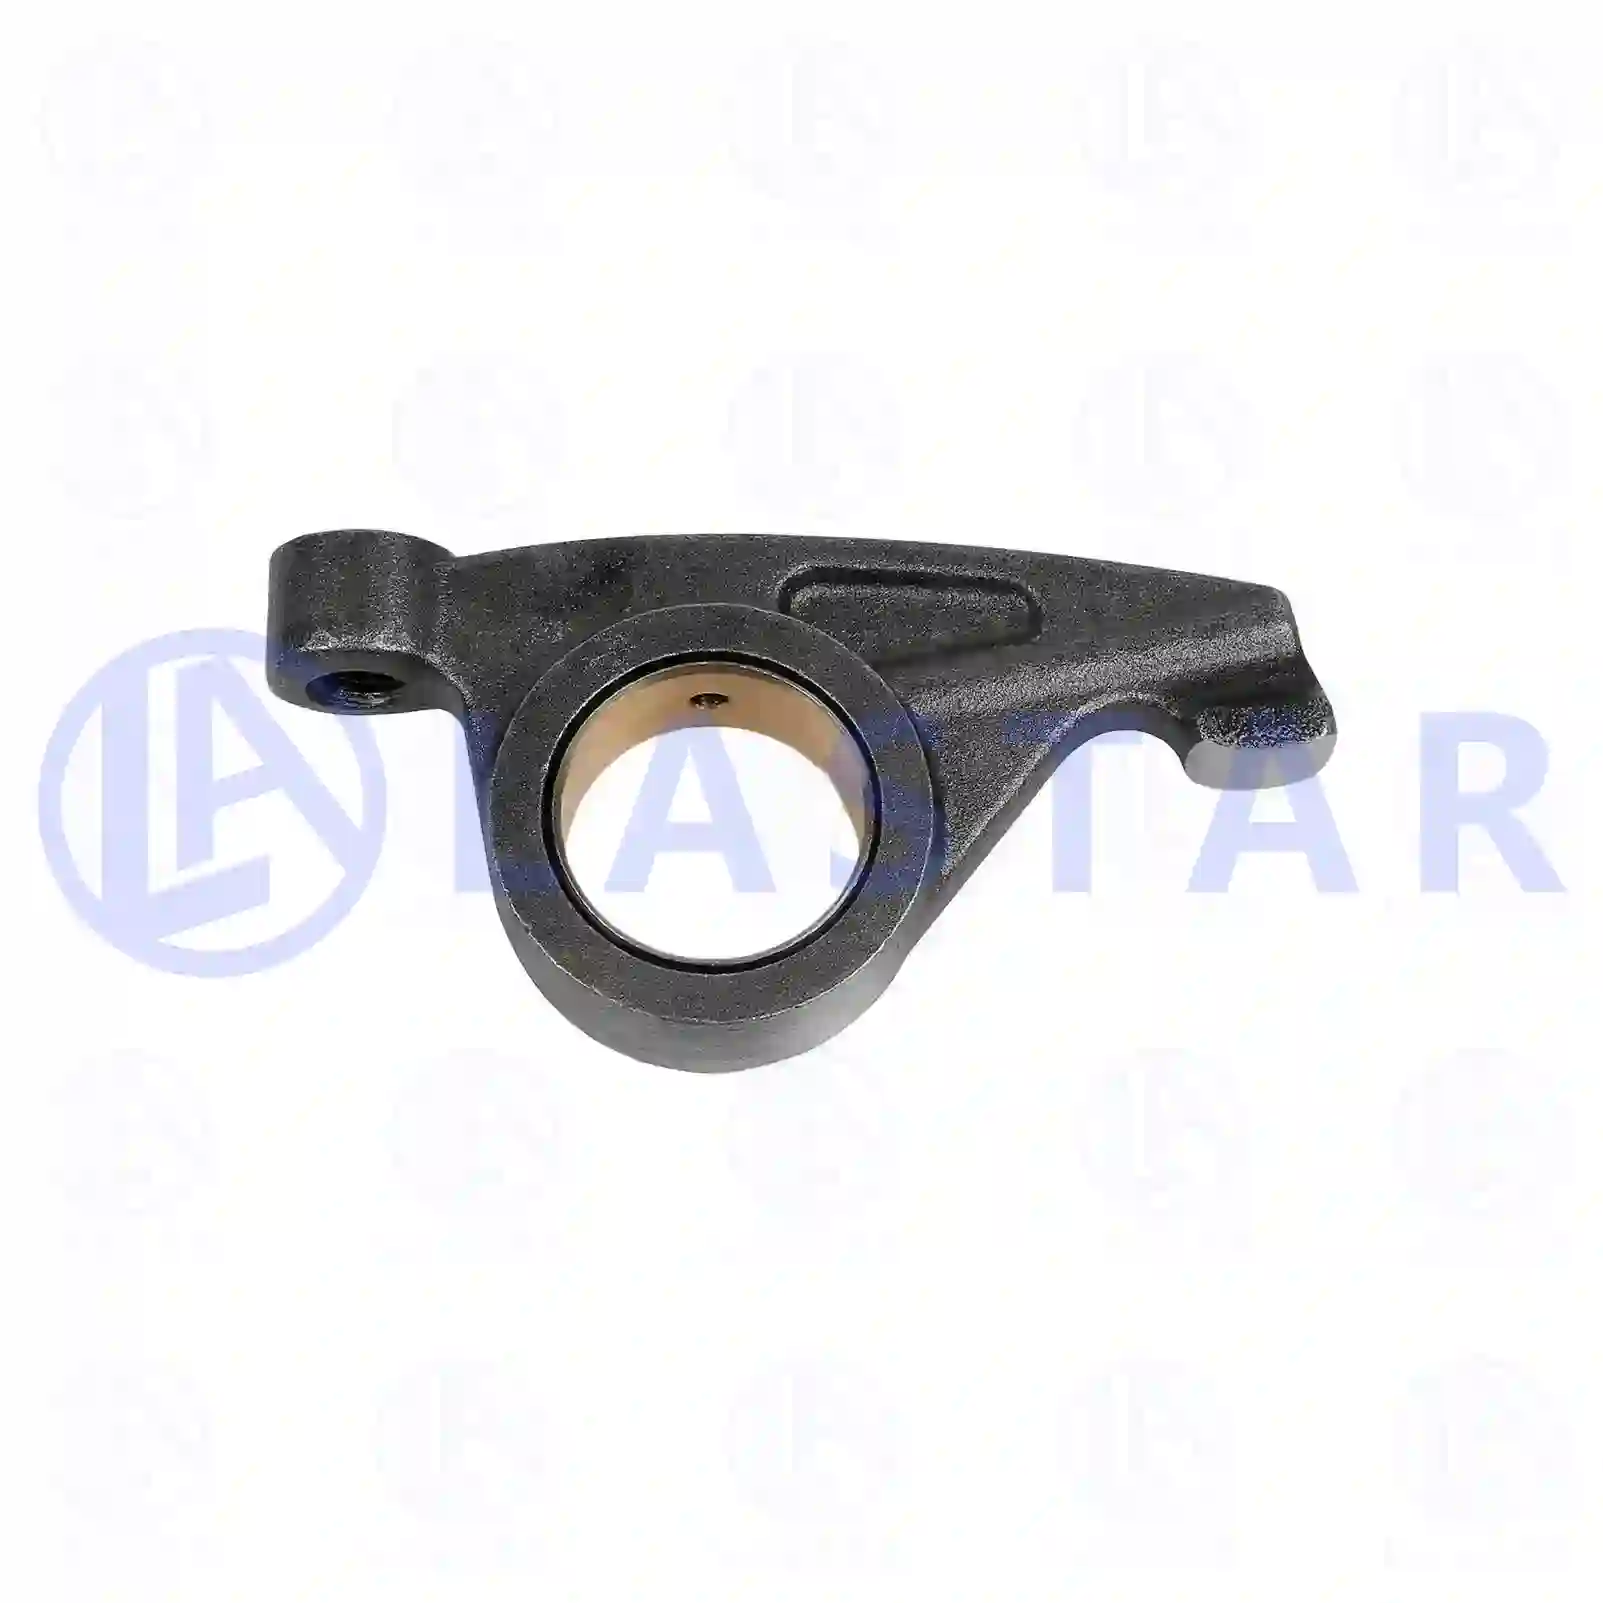 Rocker arm, intake and exhaust, 77700866, 1102305, 1333871, 369903 ||  77700866 Lastar Spare Part | Truck Spare Parts, Auotomotive Spare Parts Rocker arm, intake and exhaust, 77700866, 1102305, 1333871, 369903 ||  77700866 Lastar Spare Part | Truck Spare Parts, Auotomotive Spare Parts